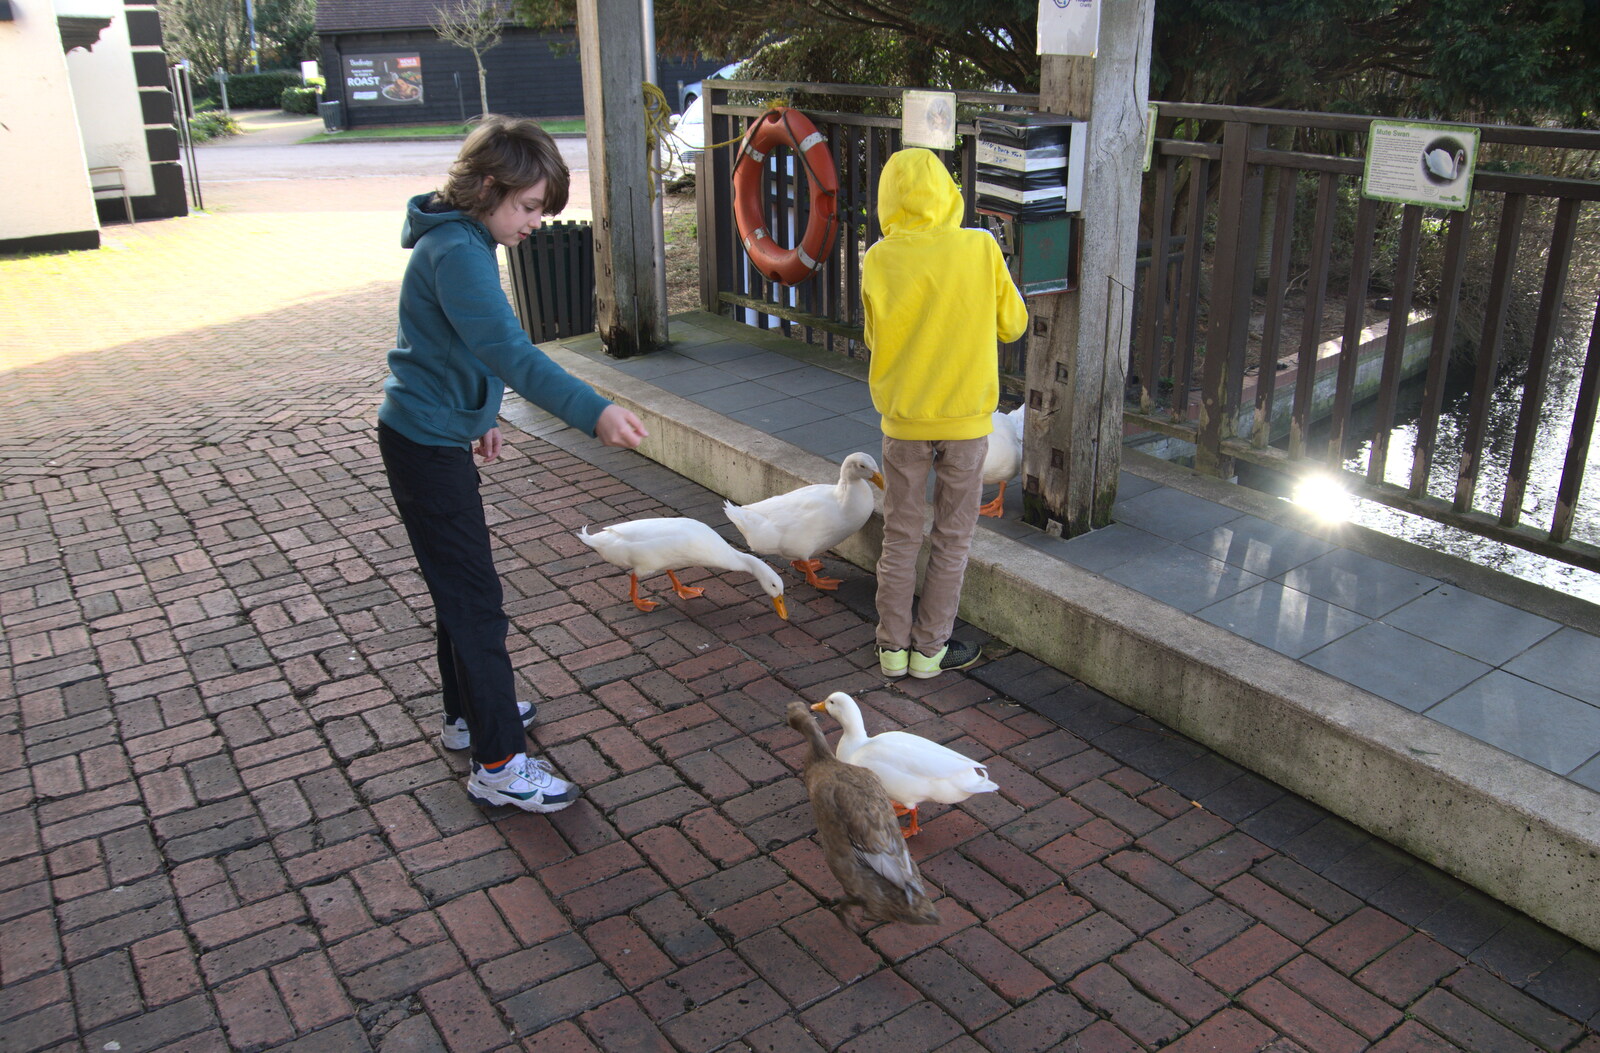 The boys are surrounded by ducks from HMS Belfast and the South Bank, Southwark, London - 17th February 2020